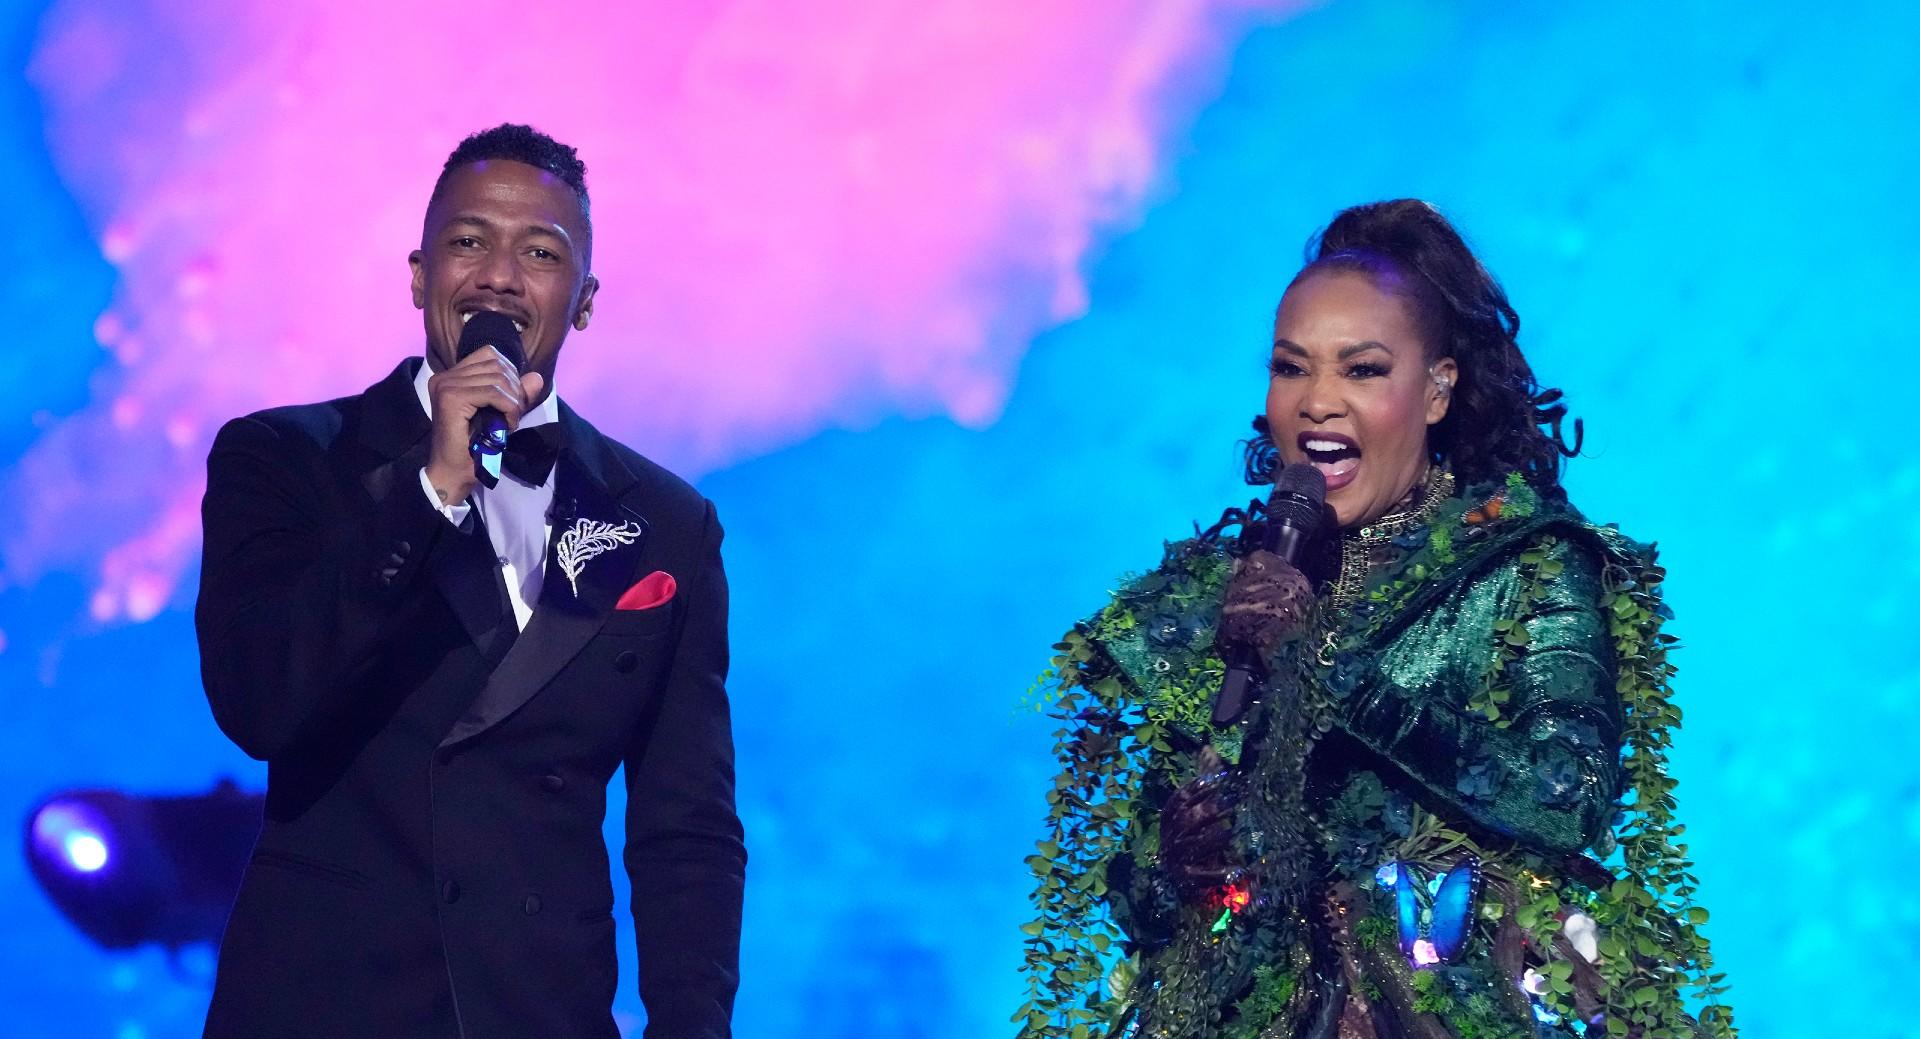 Vivica A. Fox on 'The Masked Singer'